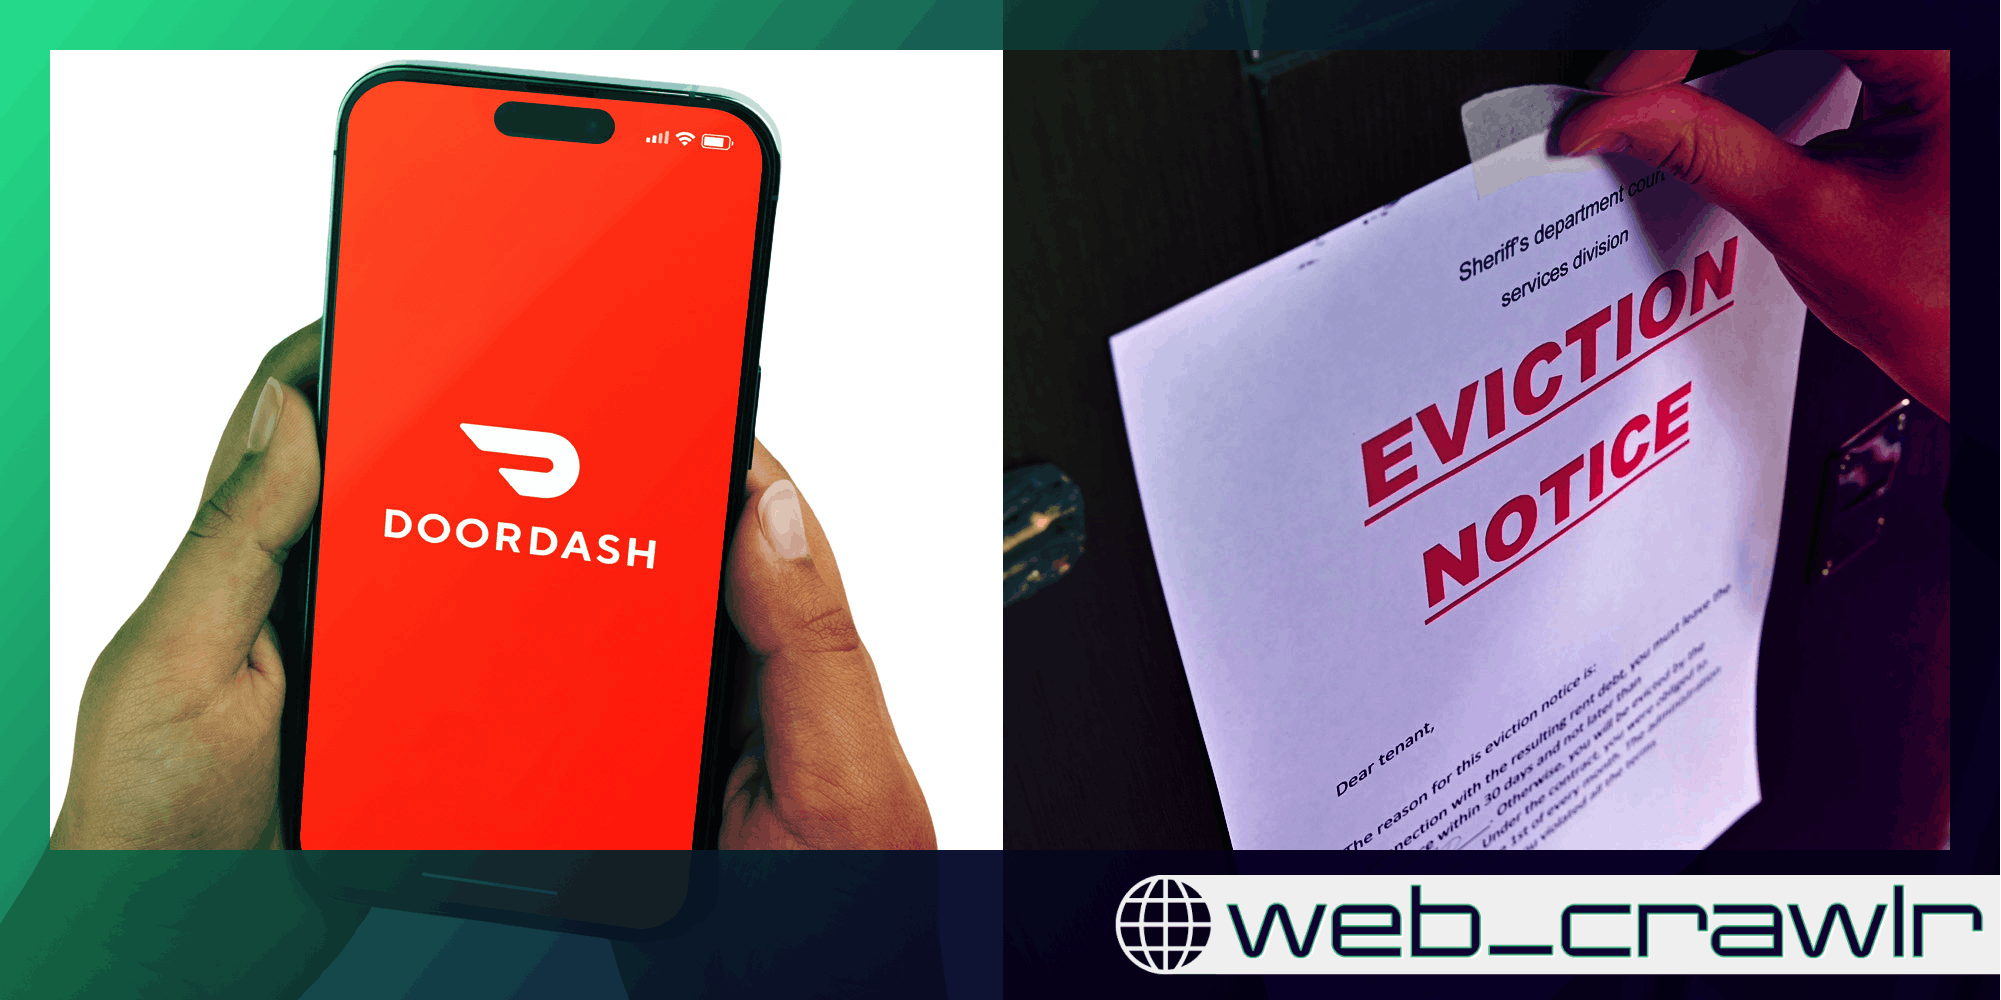 A person holding a phone with the DoorDash logo next to an eviction notice. The Daily Dot newsletter web_crawlr logo is in the bottom right corner.